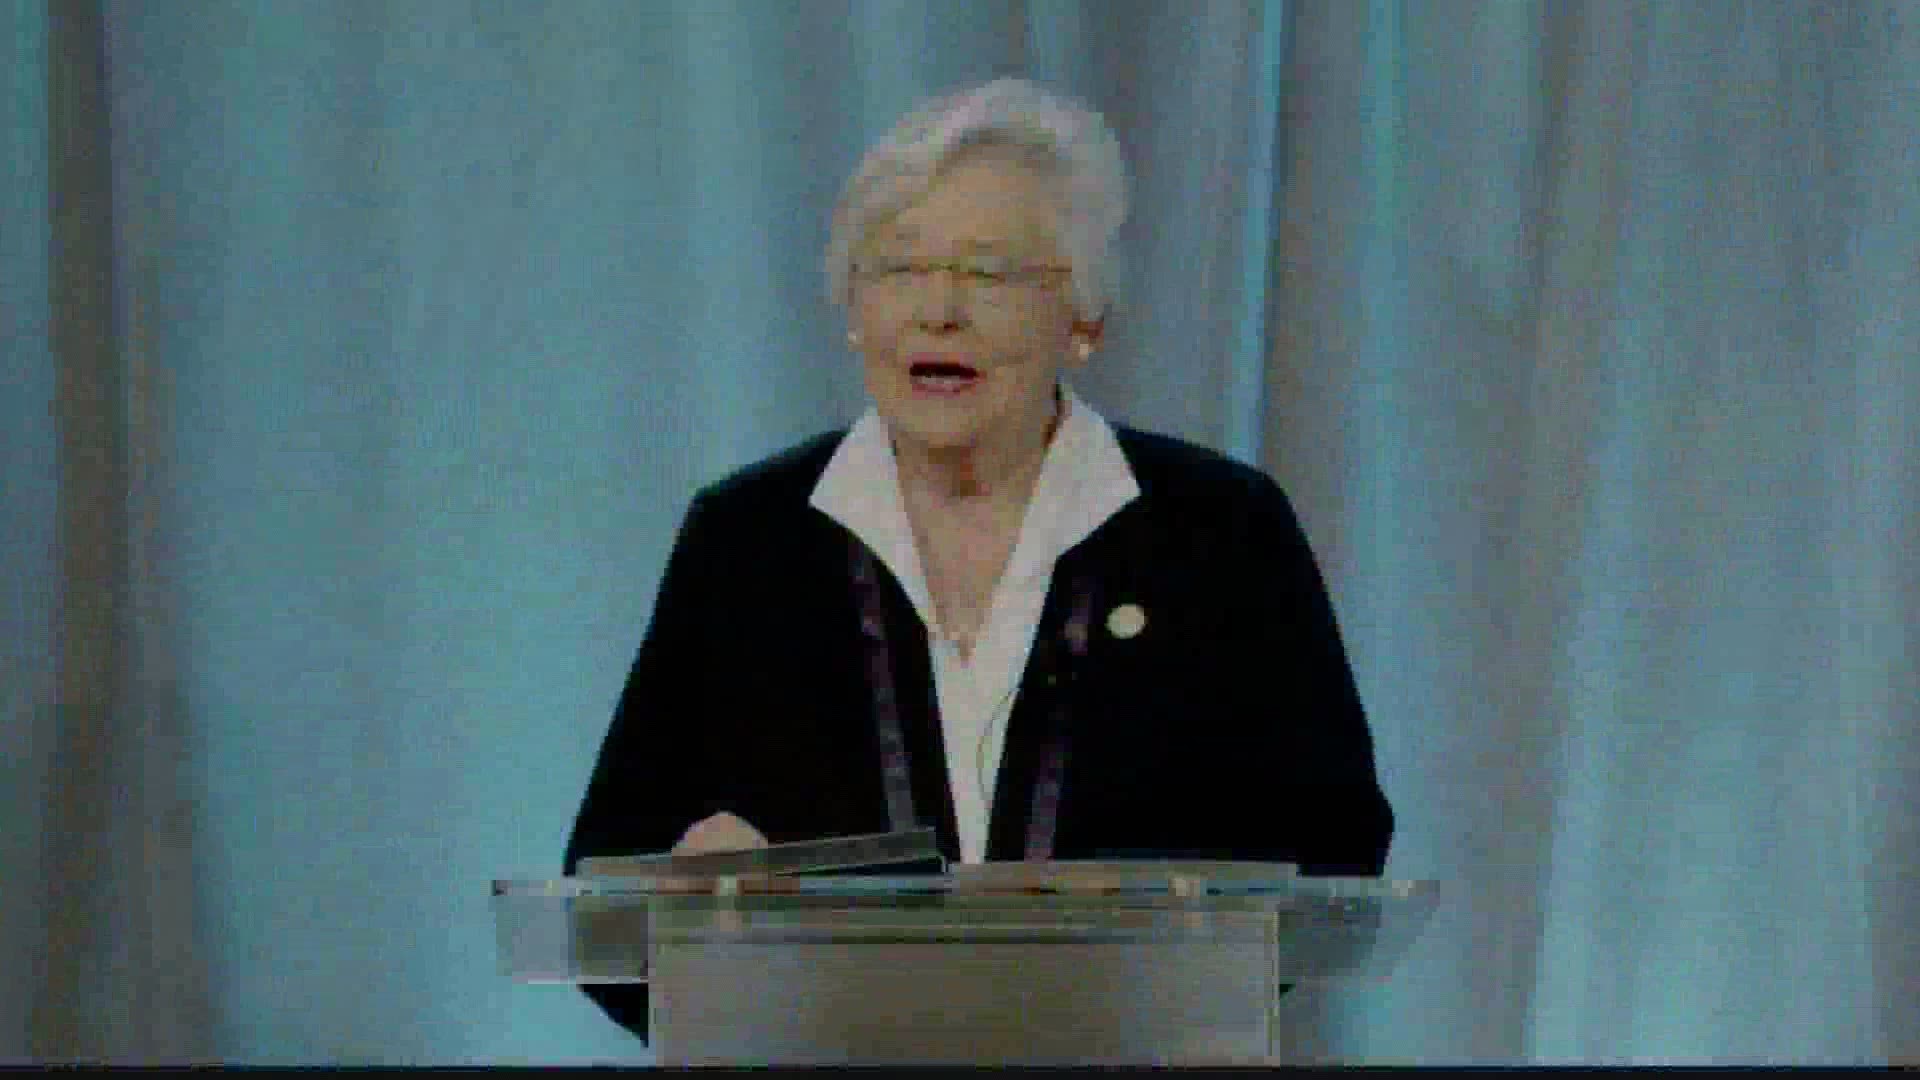 Governor Ivey reflected on the effects of the pandemic in Alabama and how Huntsville is a bright spot in the state.